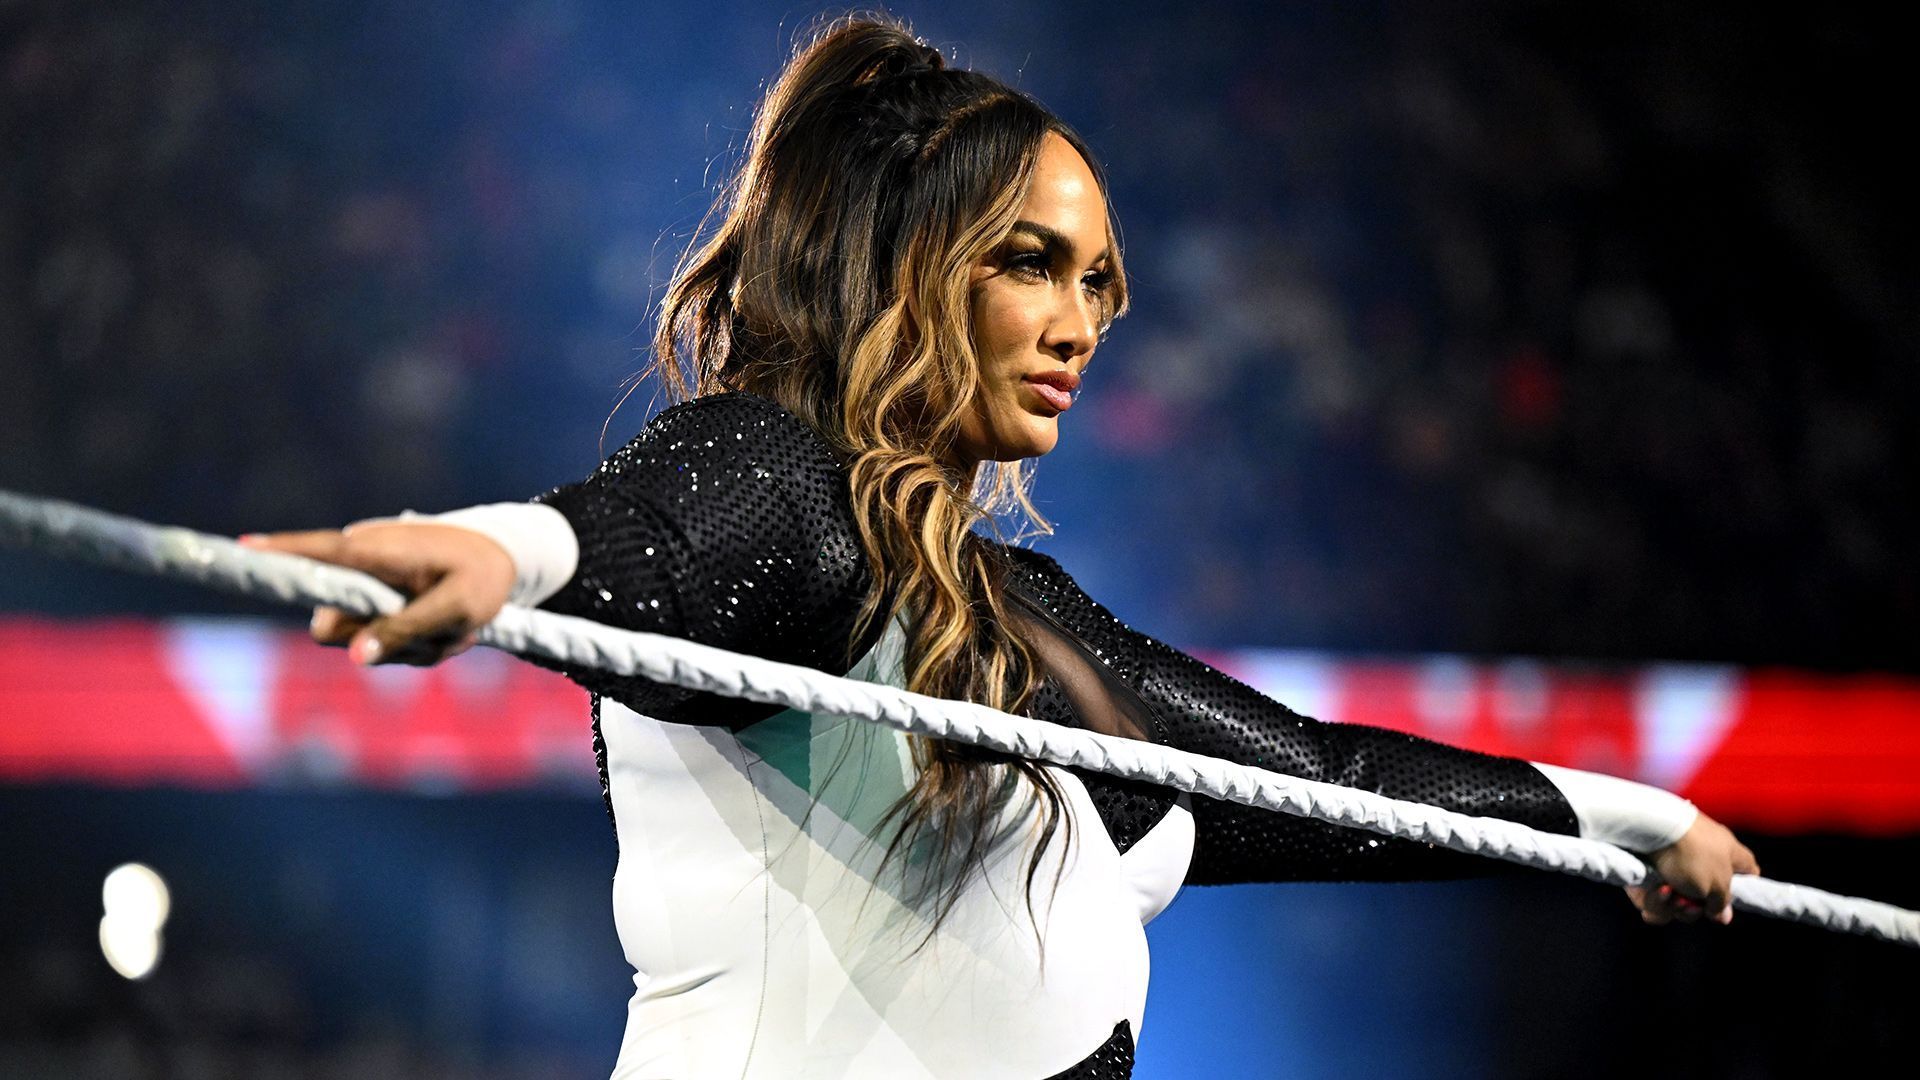 Nia Jax stands tall in the ring on WWE RAW